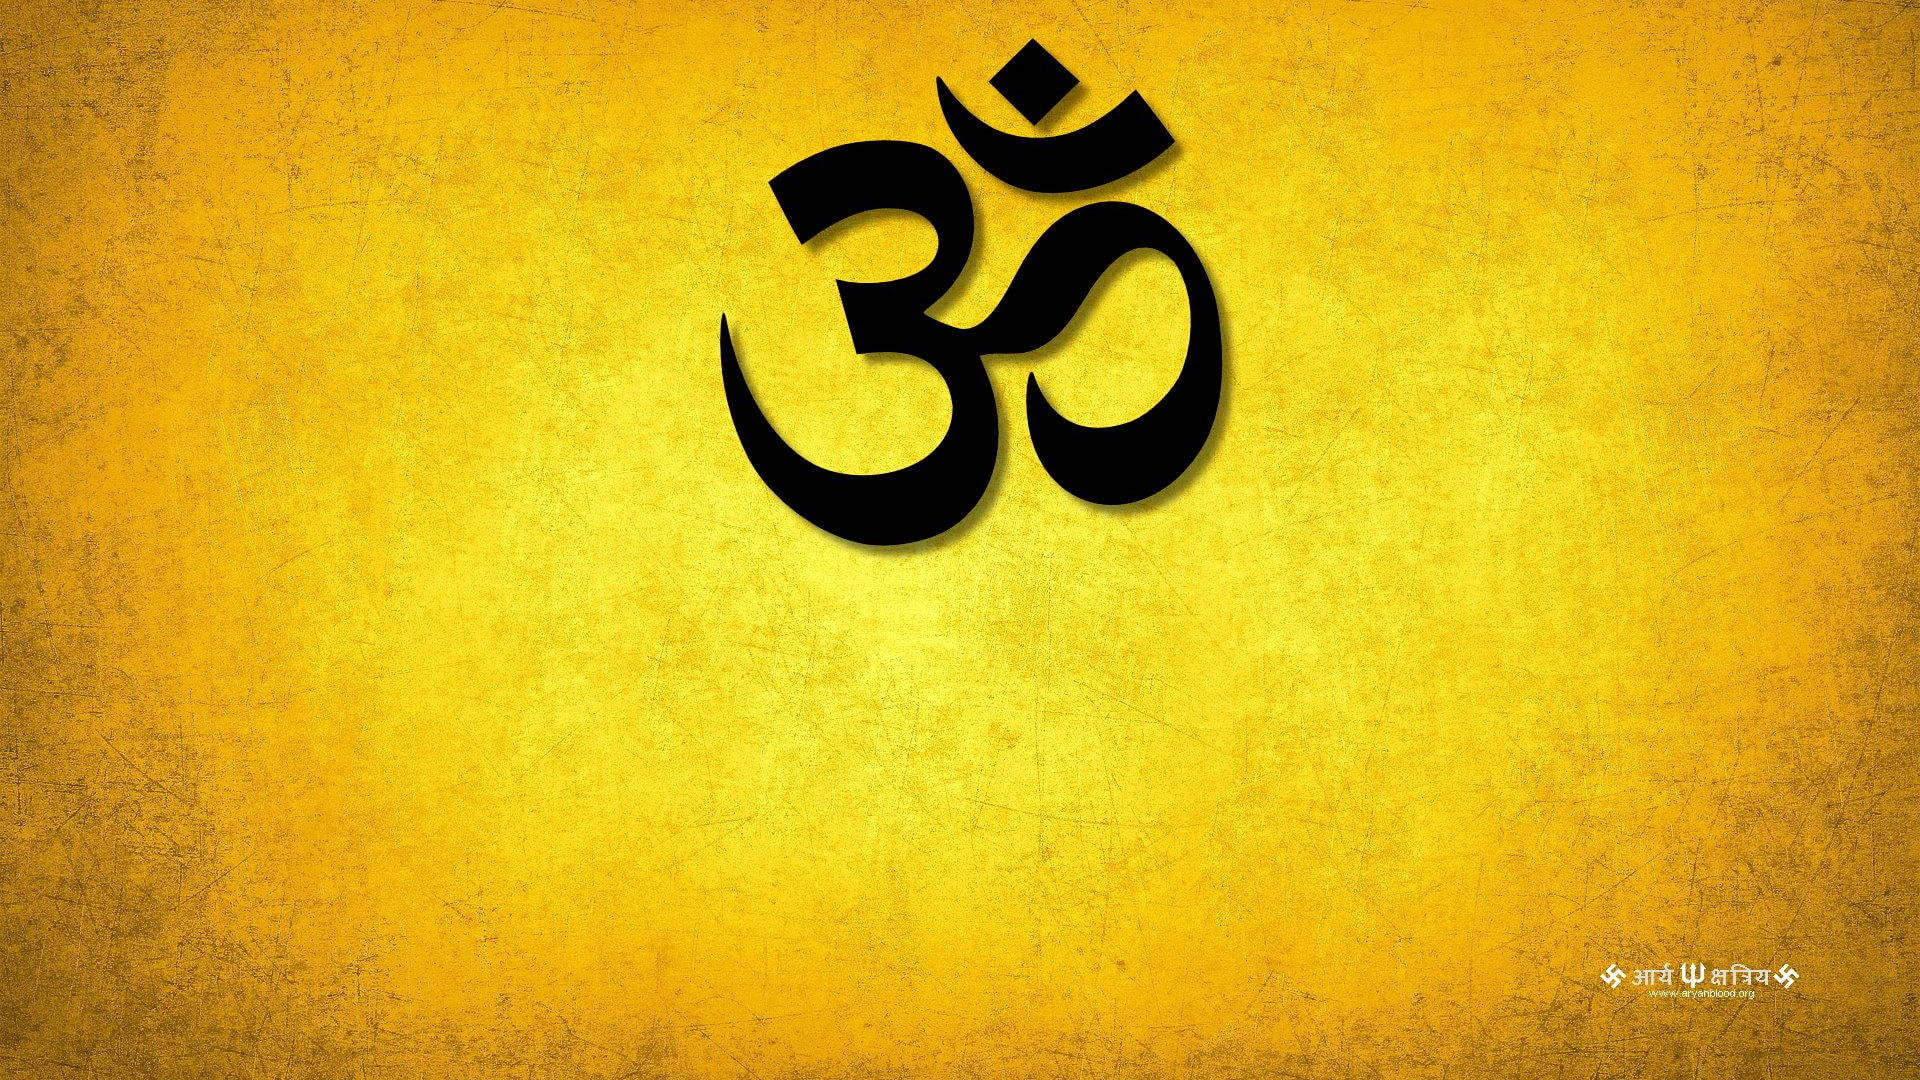 Free Om Wallpaper Downloads, [100+] Om Wallpapers for FREE 